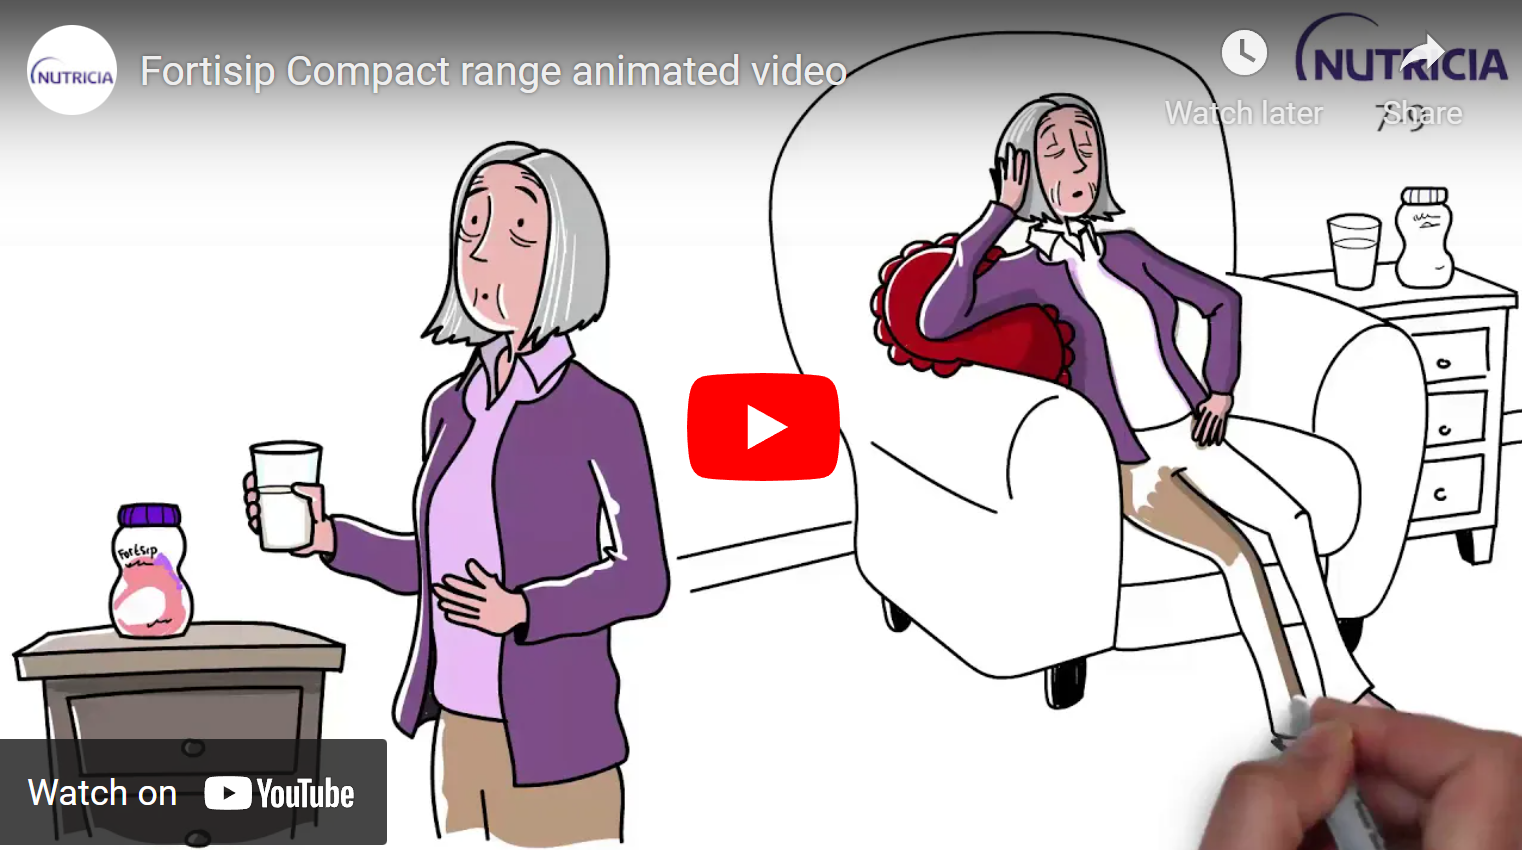 Fortisip Compact range animated video